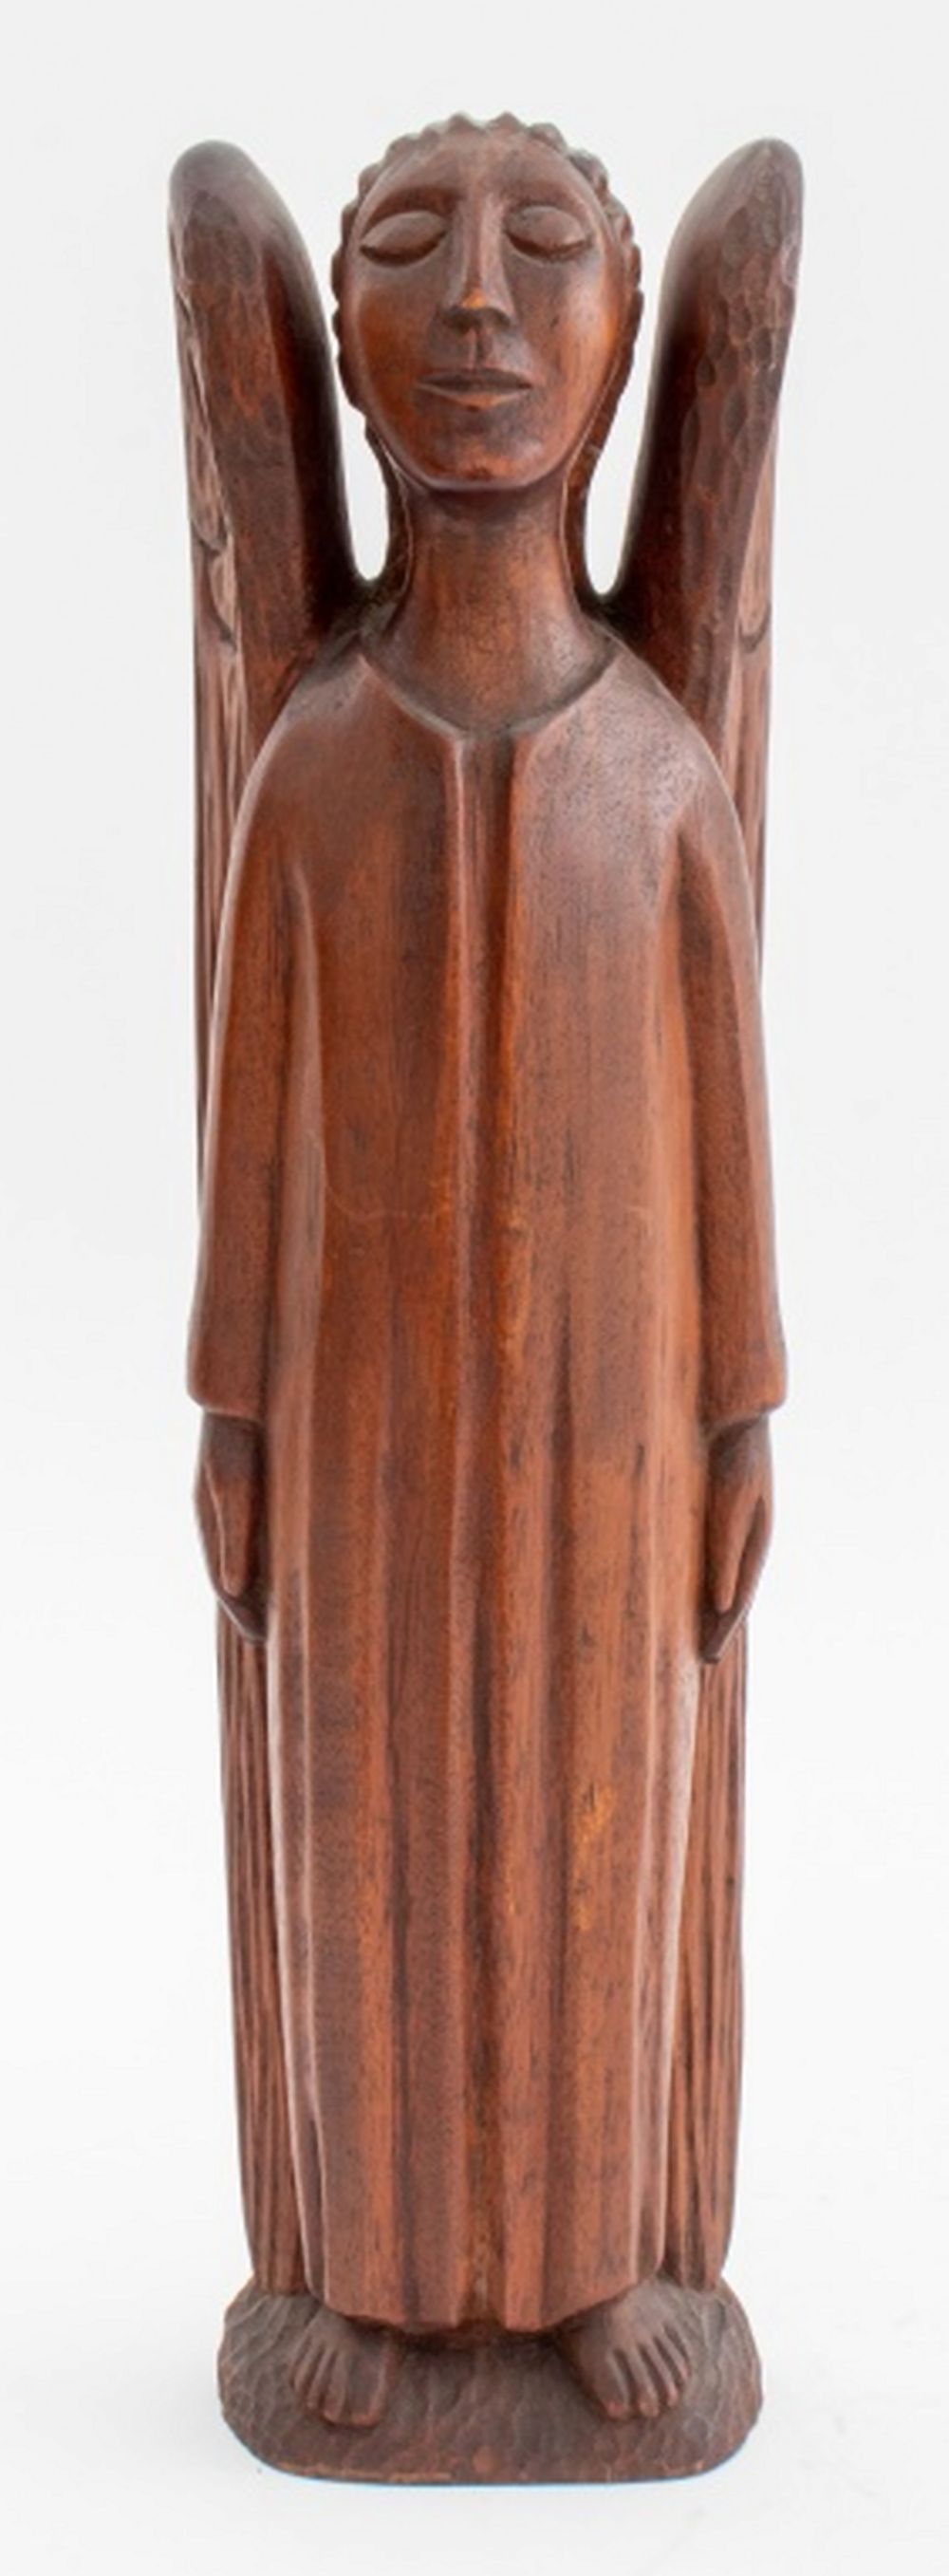 RENZO CARVED WOODEN ANGEL SCULPTURE